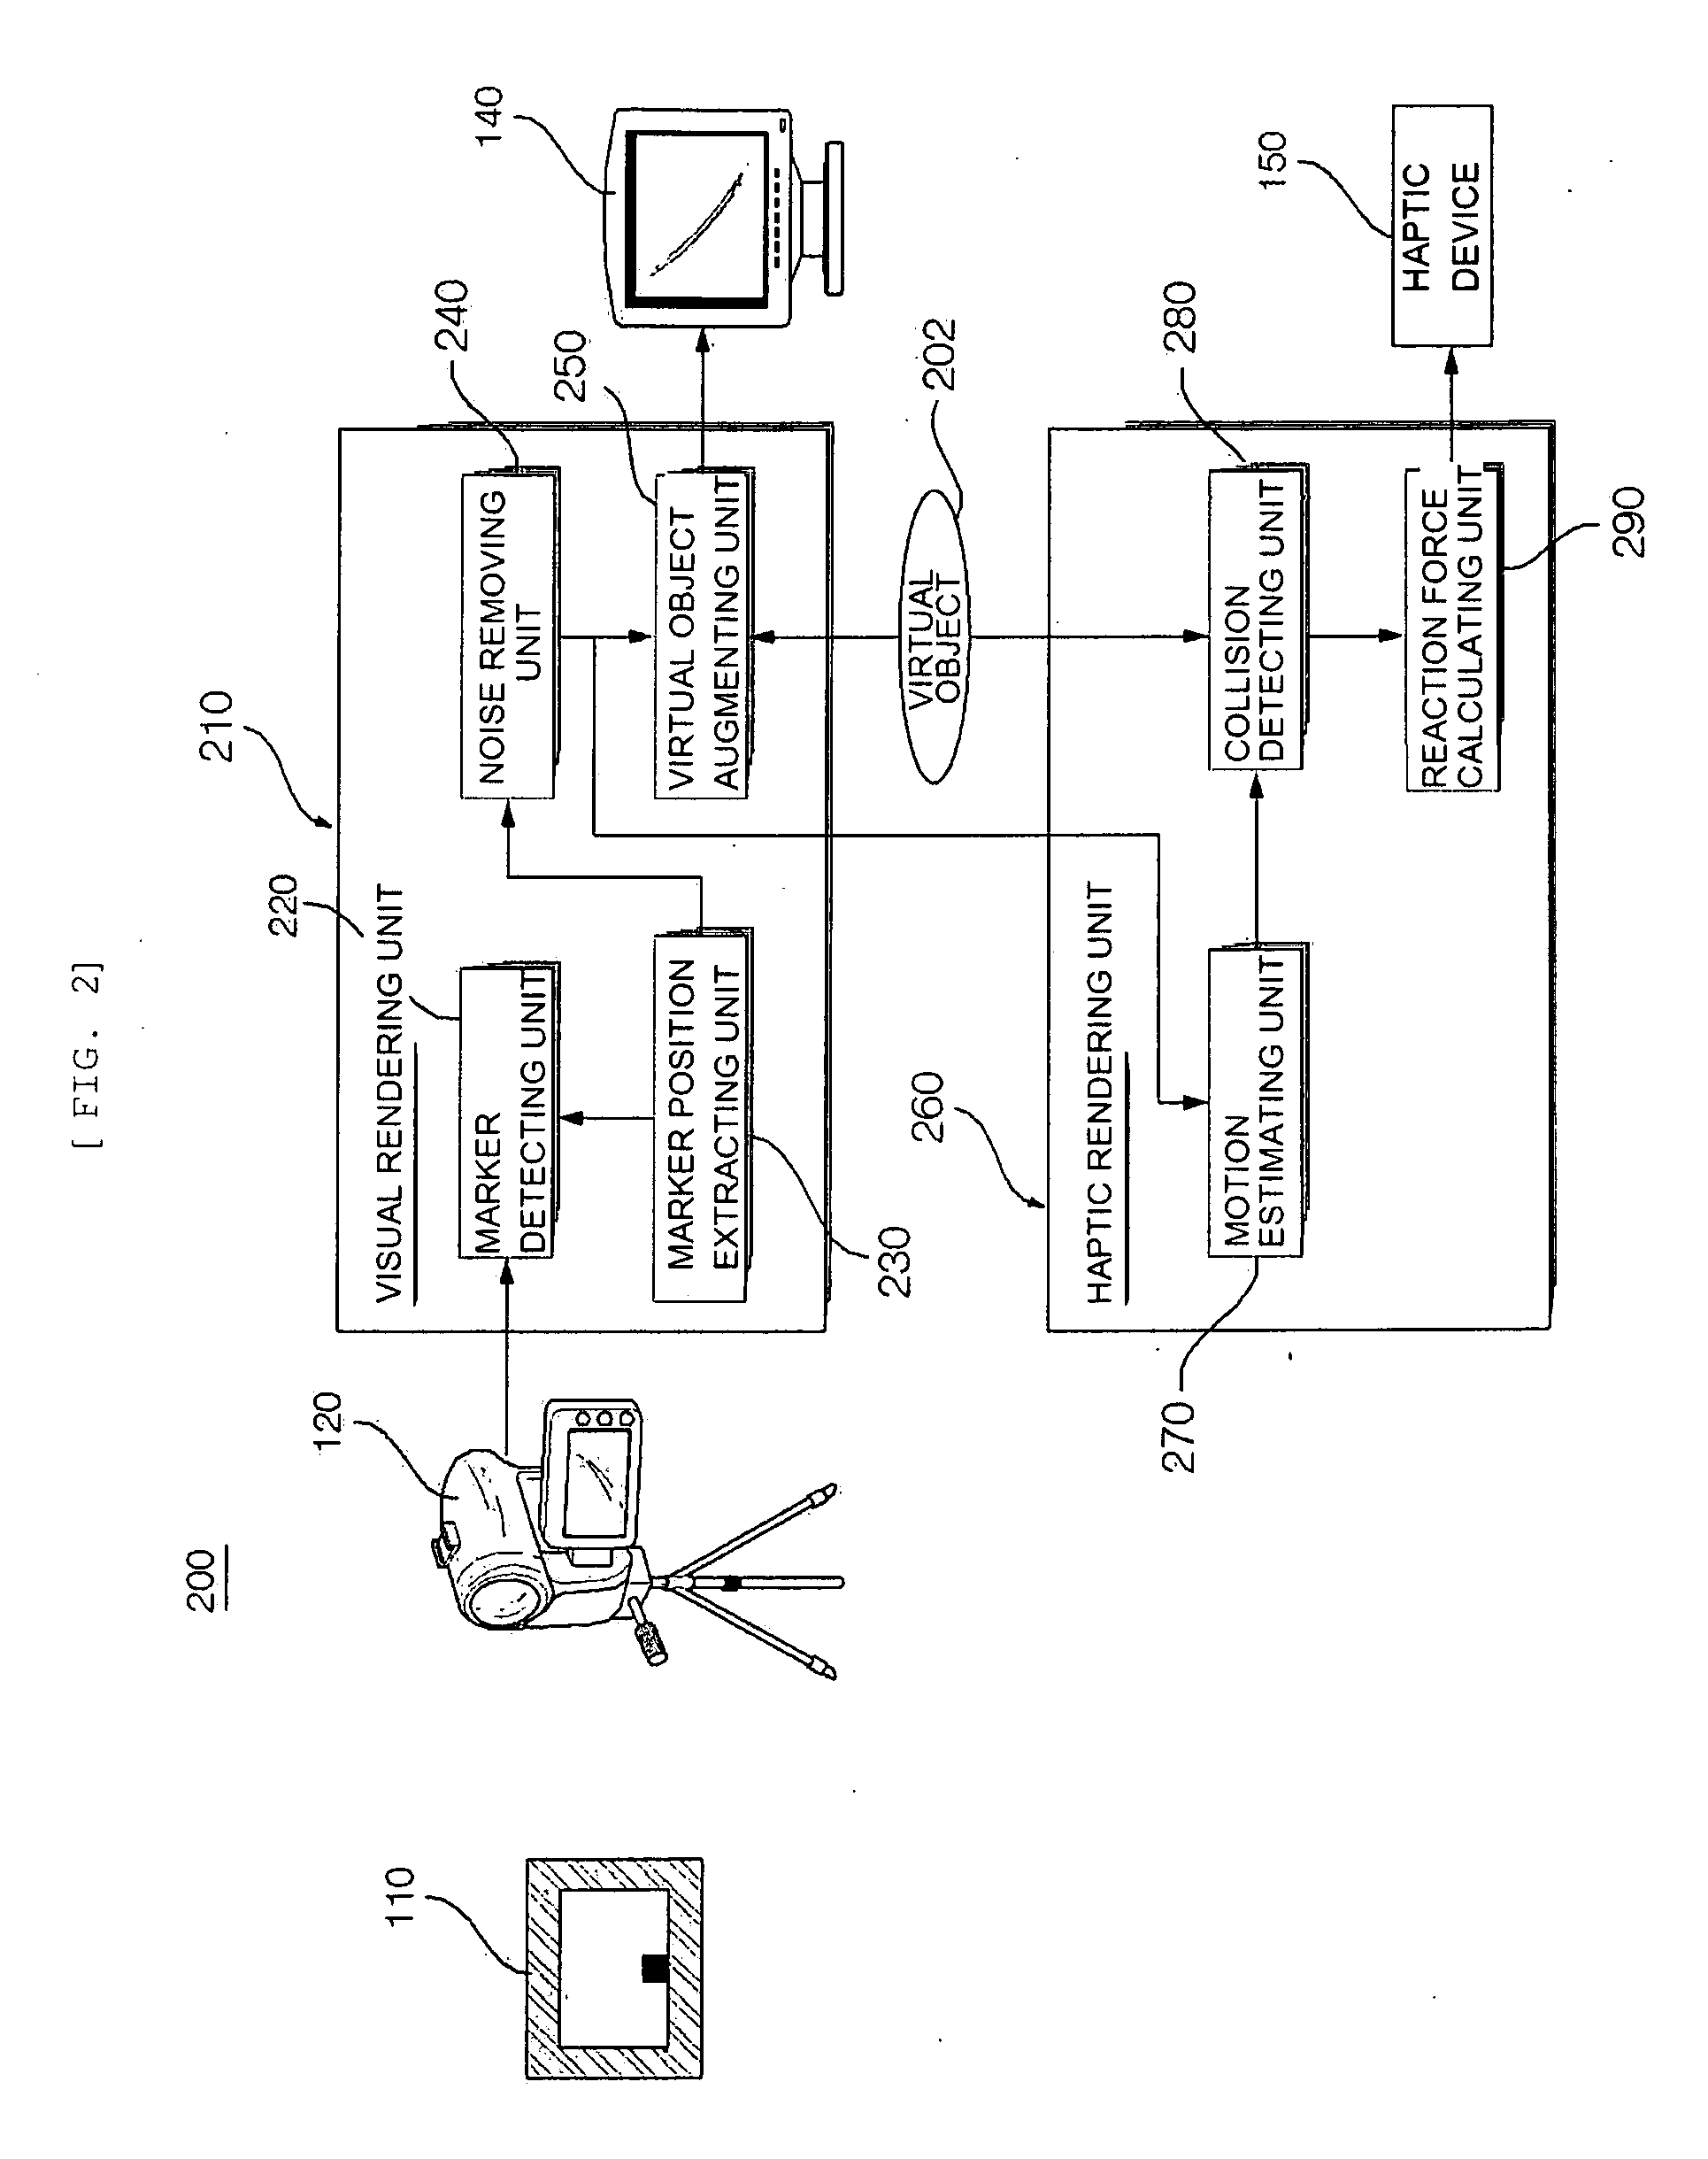 Method and system for haptic interaction in augmented reality